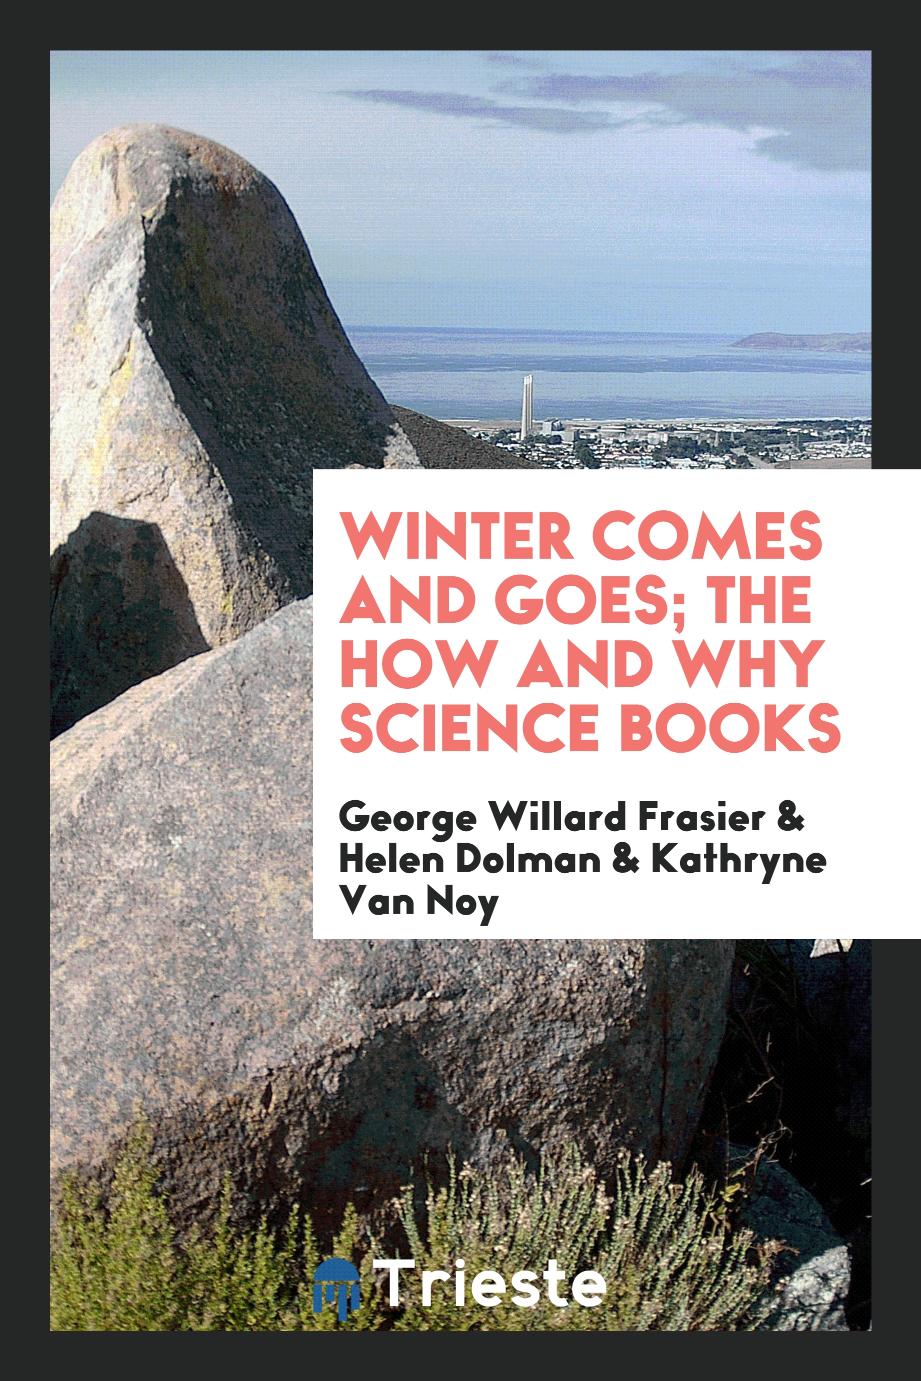 Winter comes and goes; the how and why science books